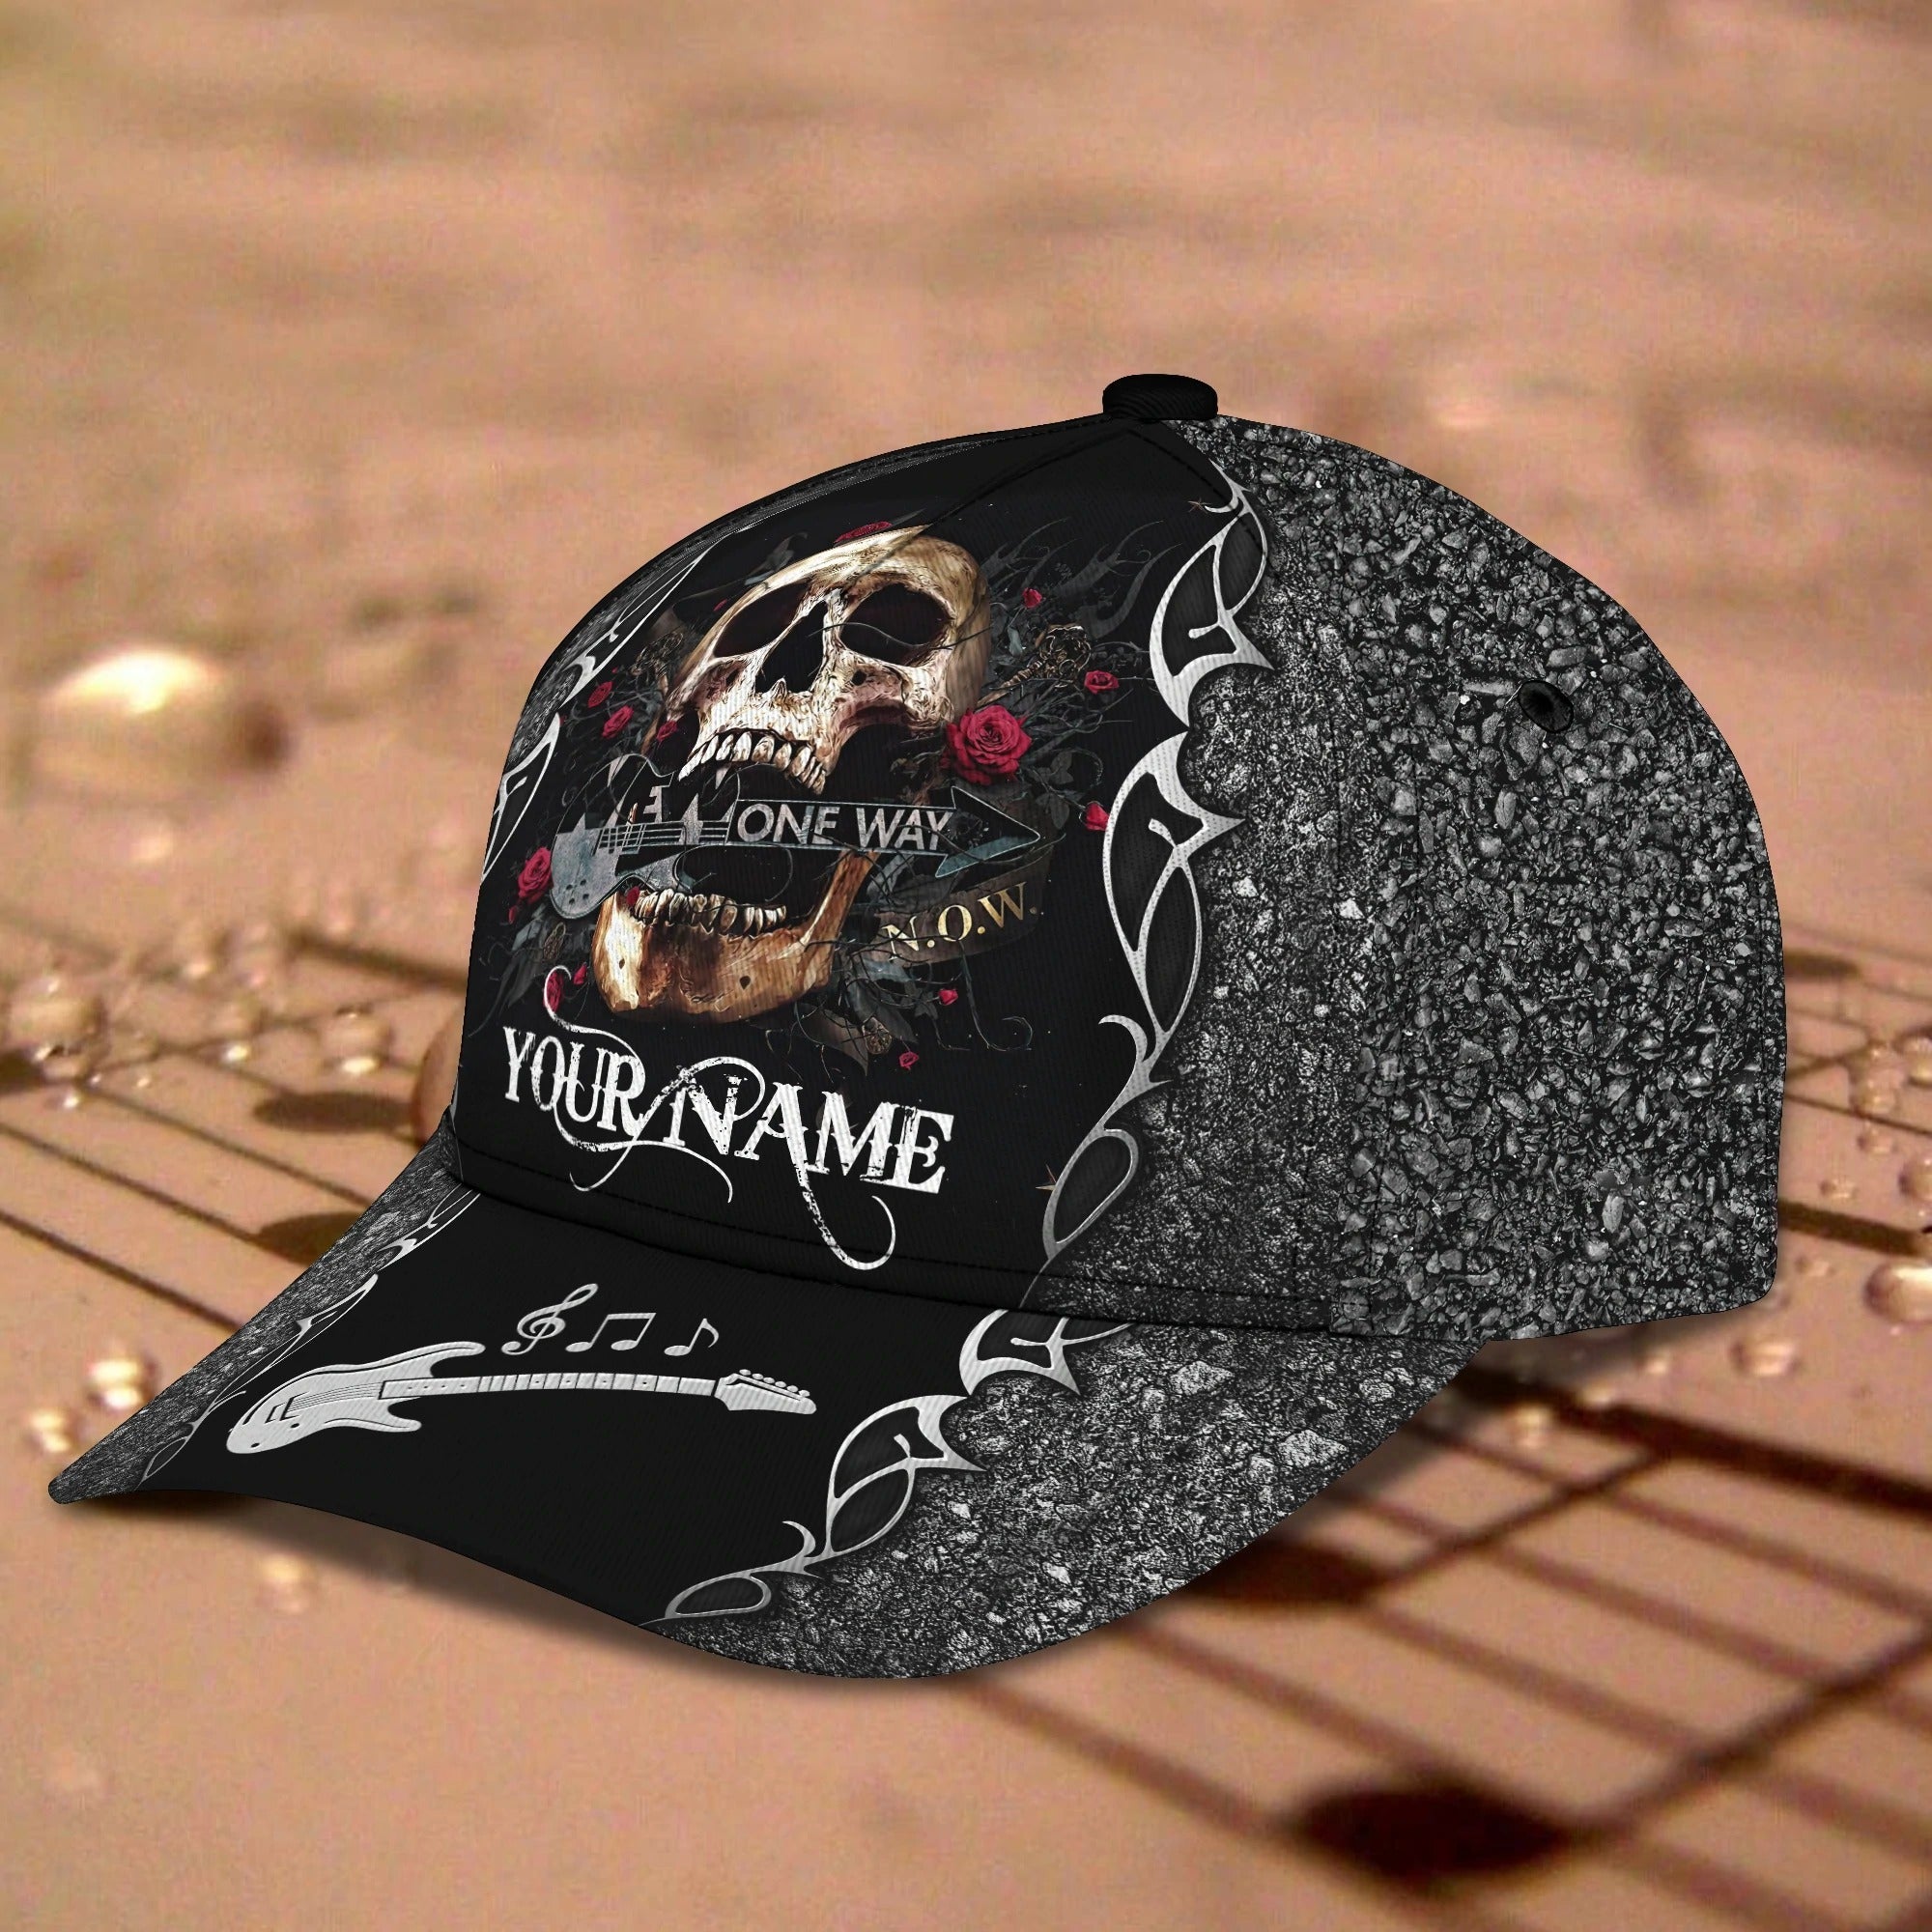 Customized Skull Guitar Classic Cap Hat For My Guitarist Friend/ To My Son Daughter Love Guitar Gifts